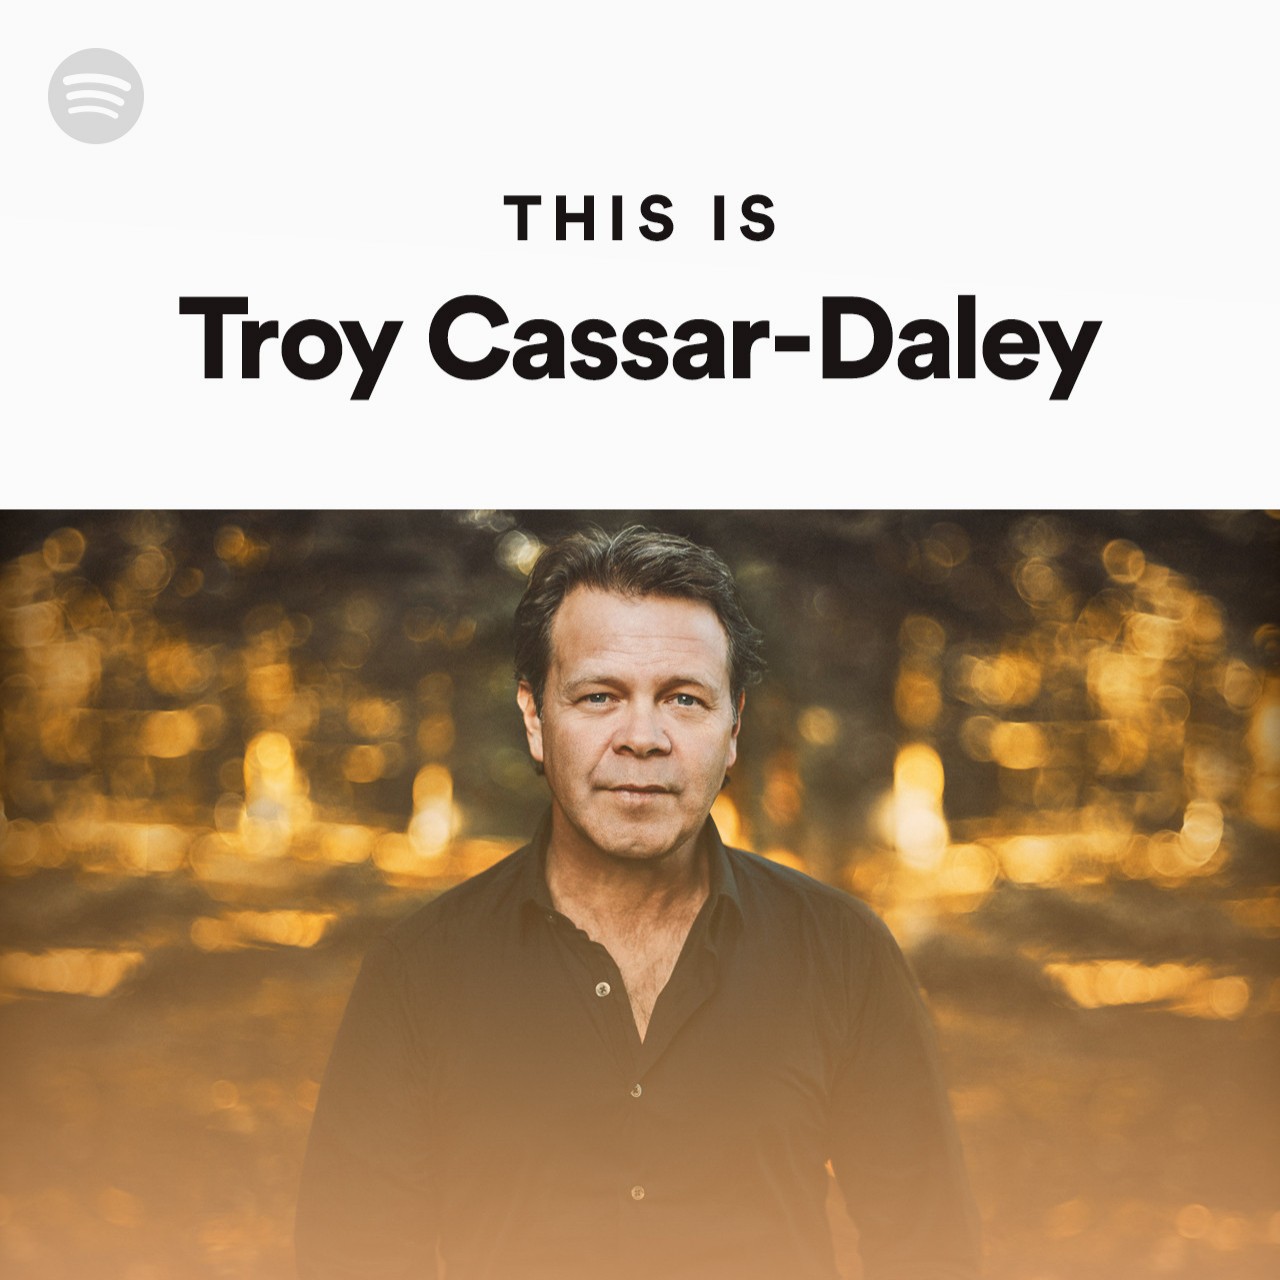 This Is Troy Cassar-Daley